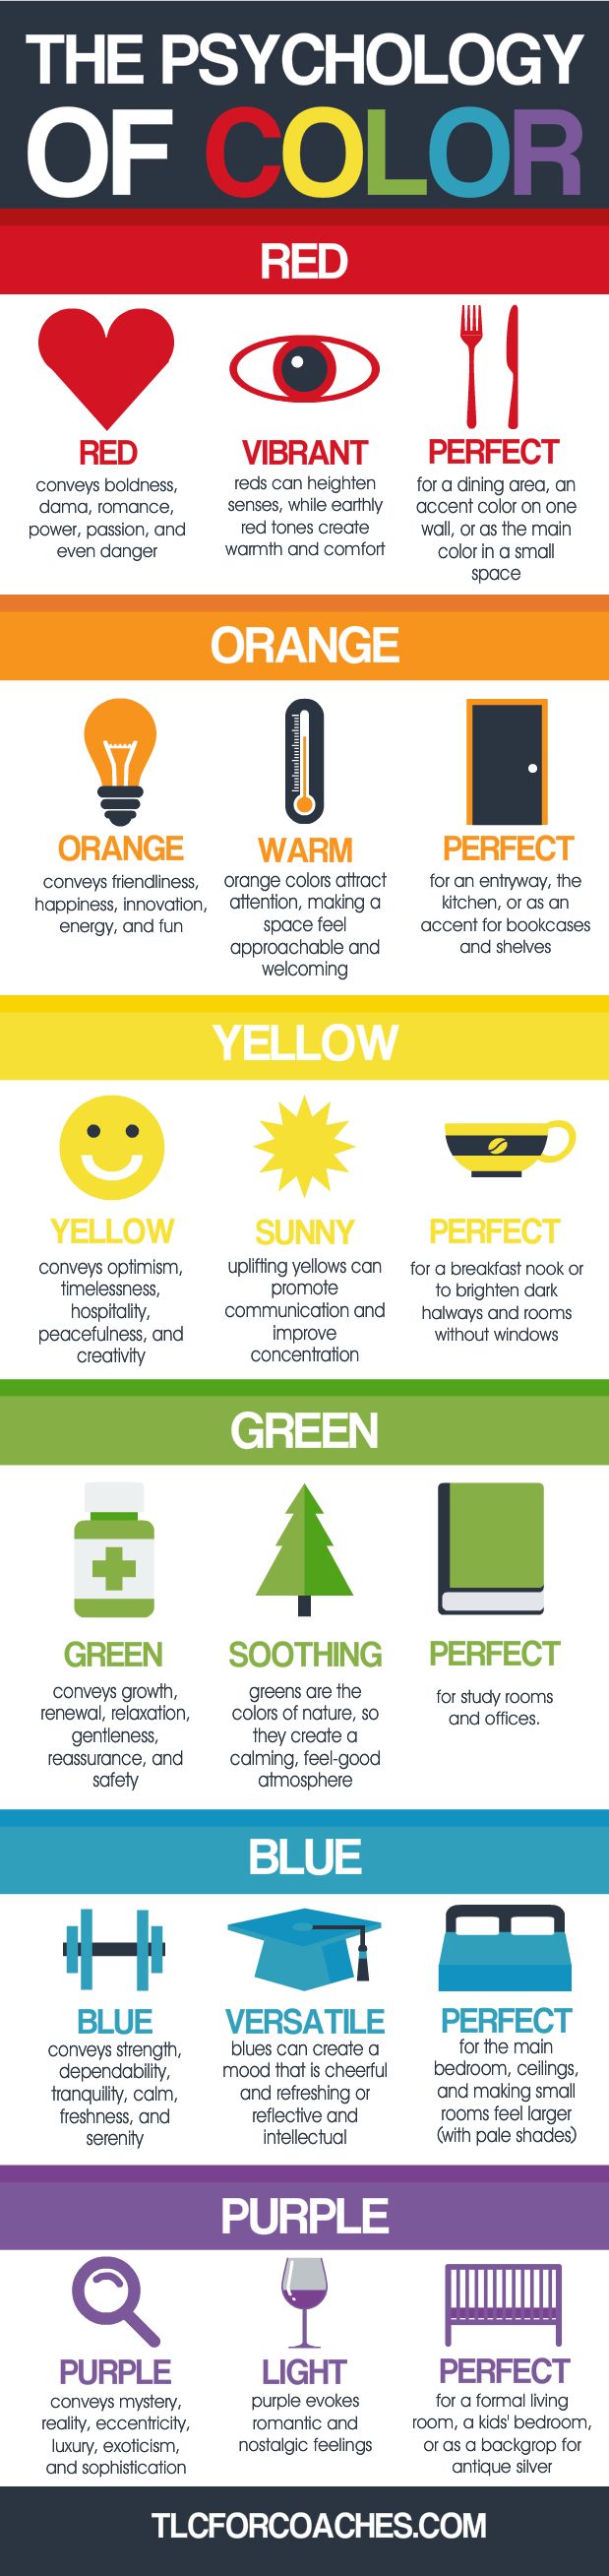 1569793575_933_Psychology-Infographic-The-Psychology-of-Color-in-Branding Psychology Infographic : The Psychology of Color in Branding